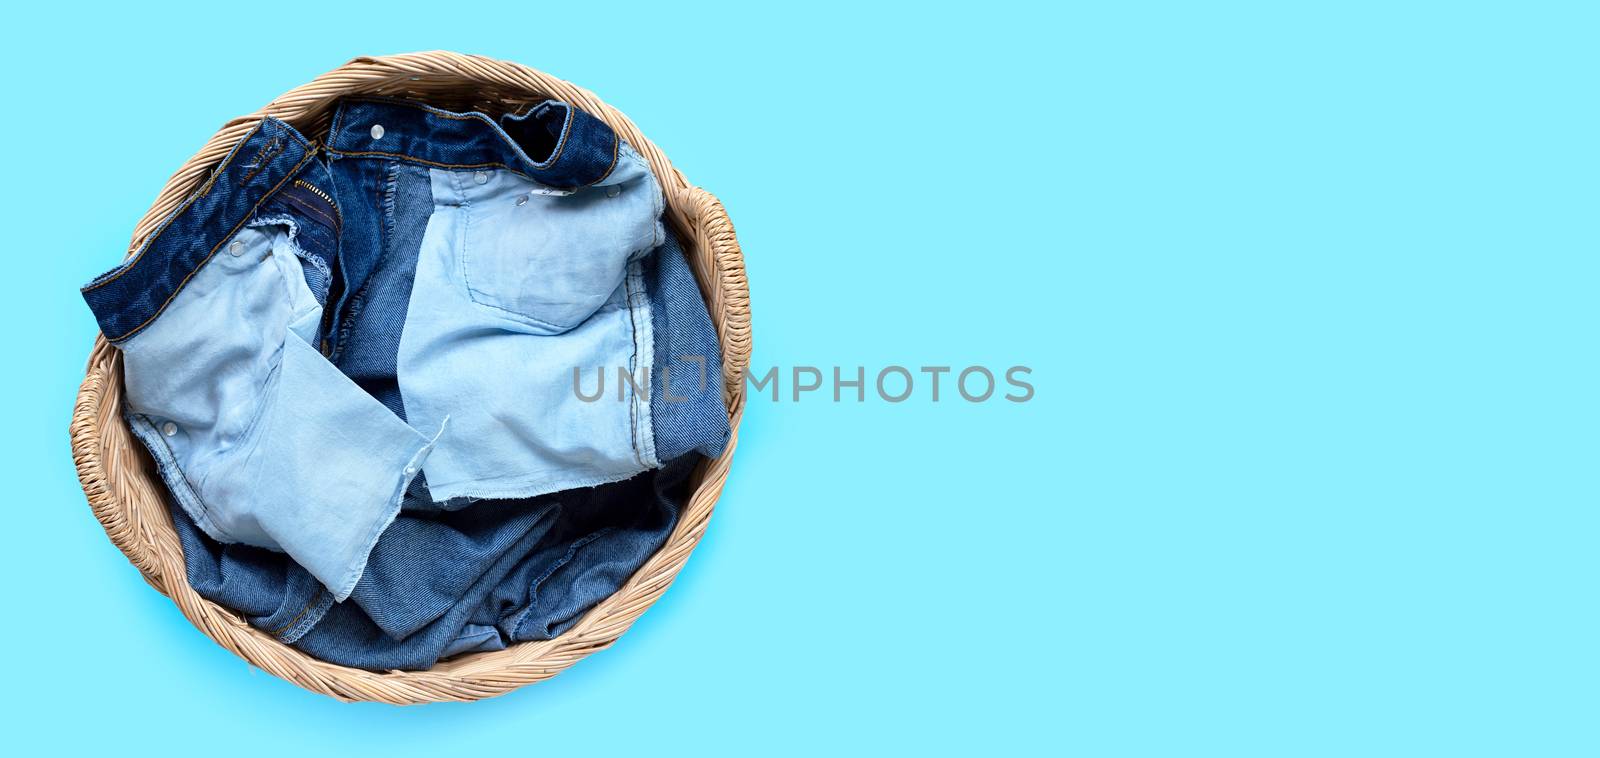 Jeans in laundry basket on blue background. Top view